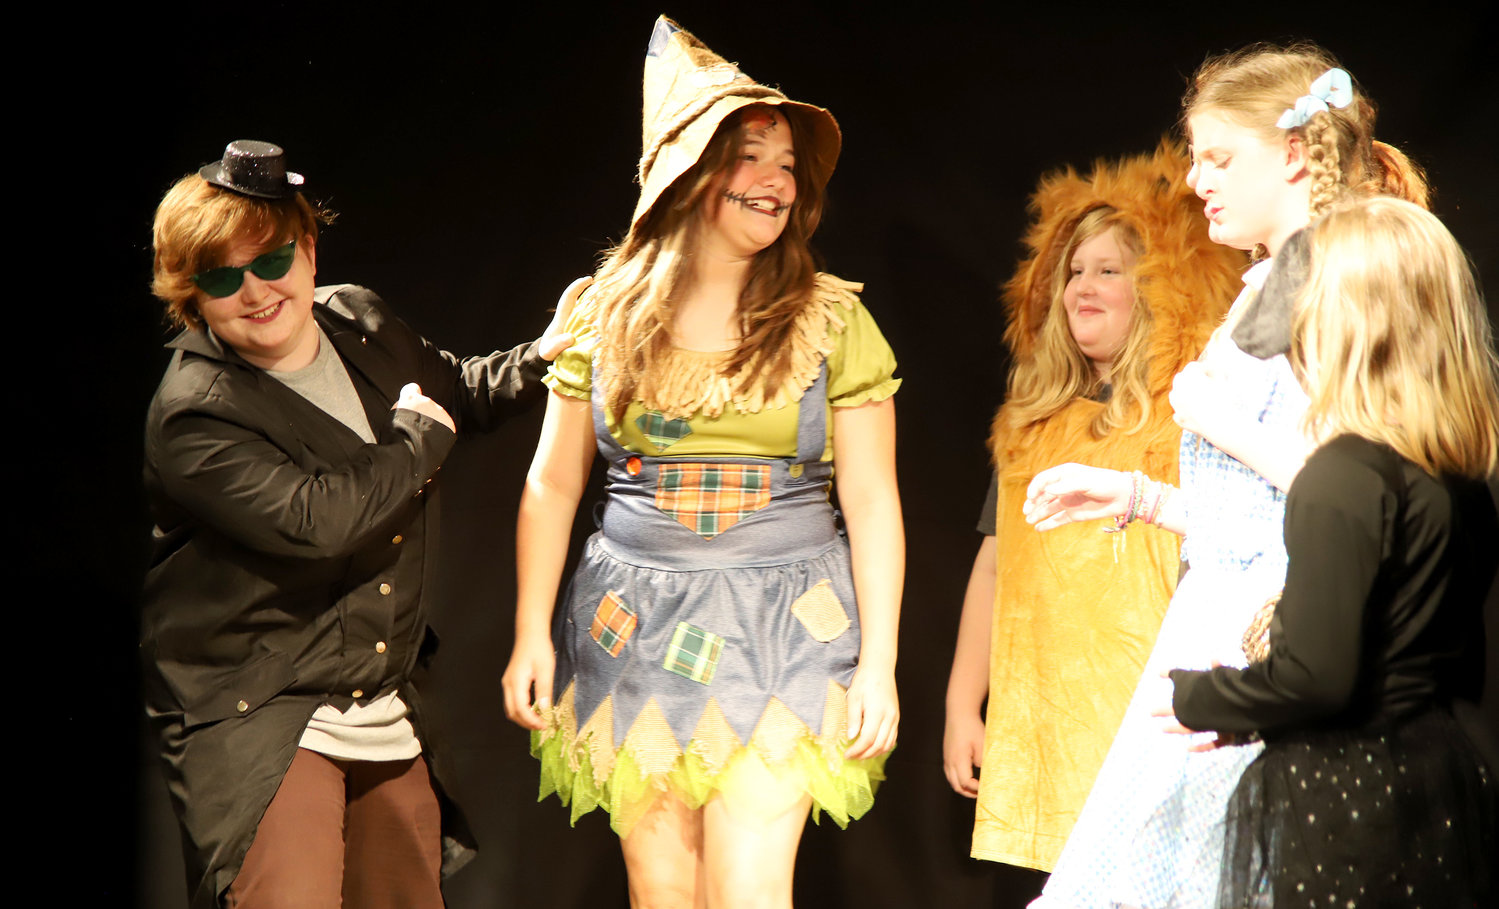 Oscar Bauswell helps out Scarecrow, the Cowardly Lion, the Tin Woodsman, Dorothy, and Toto in The Wizard of Oz Monday night at the OFP's dress rehearsal for the summer youth production. The shows kick off July 29 in Fort Madison.